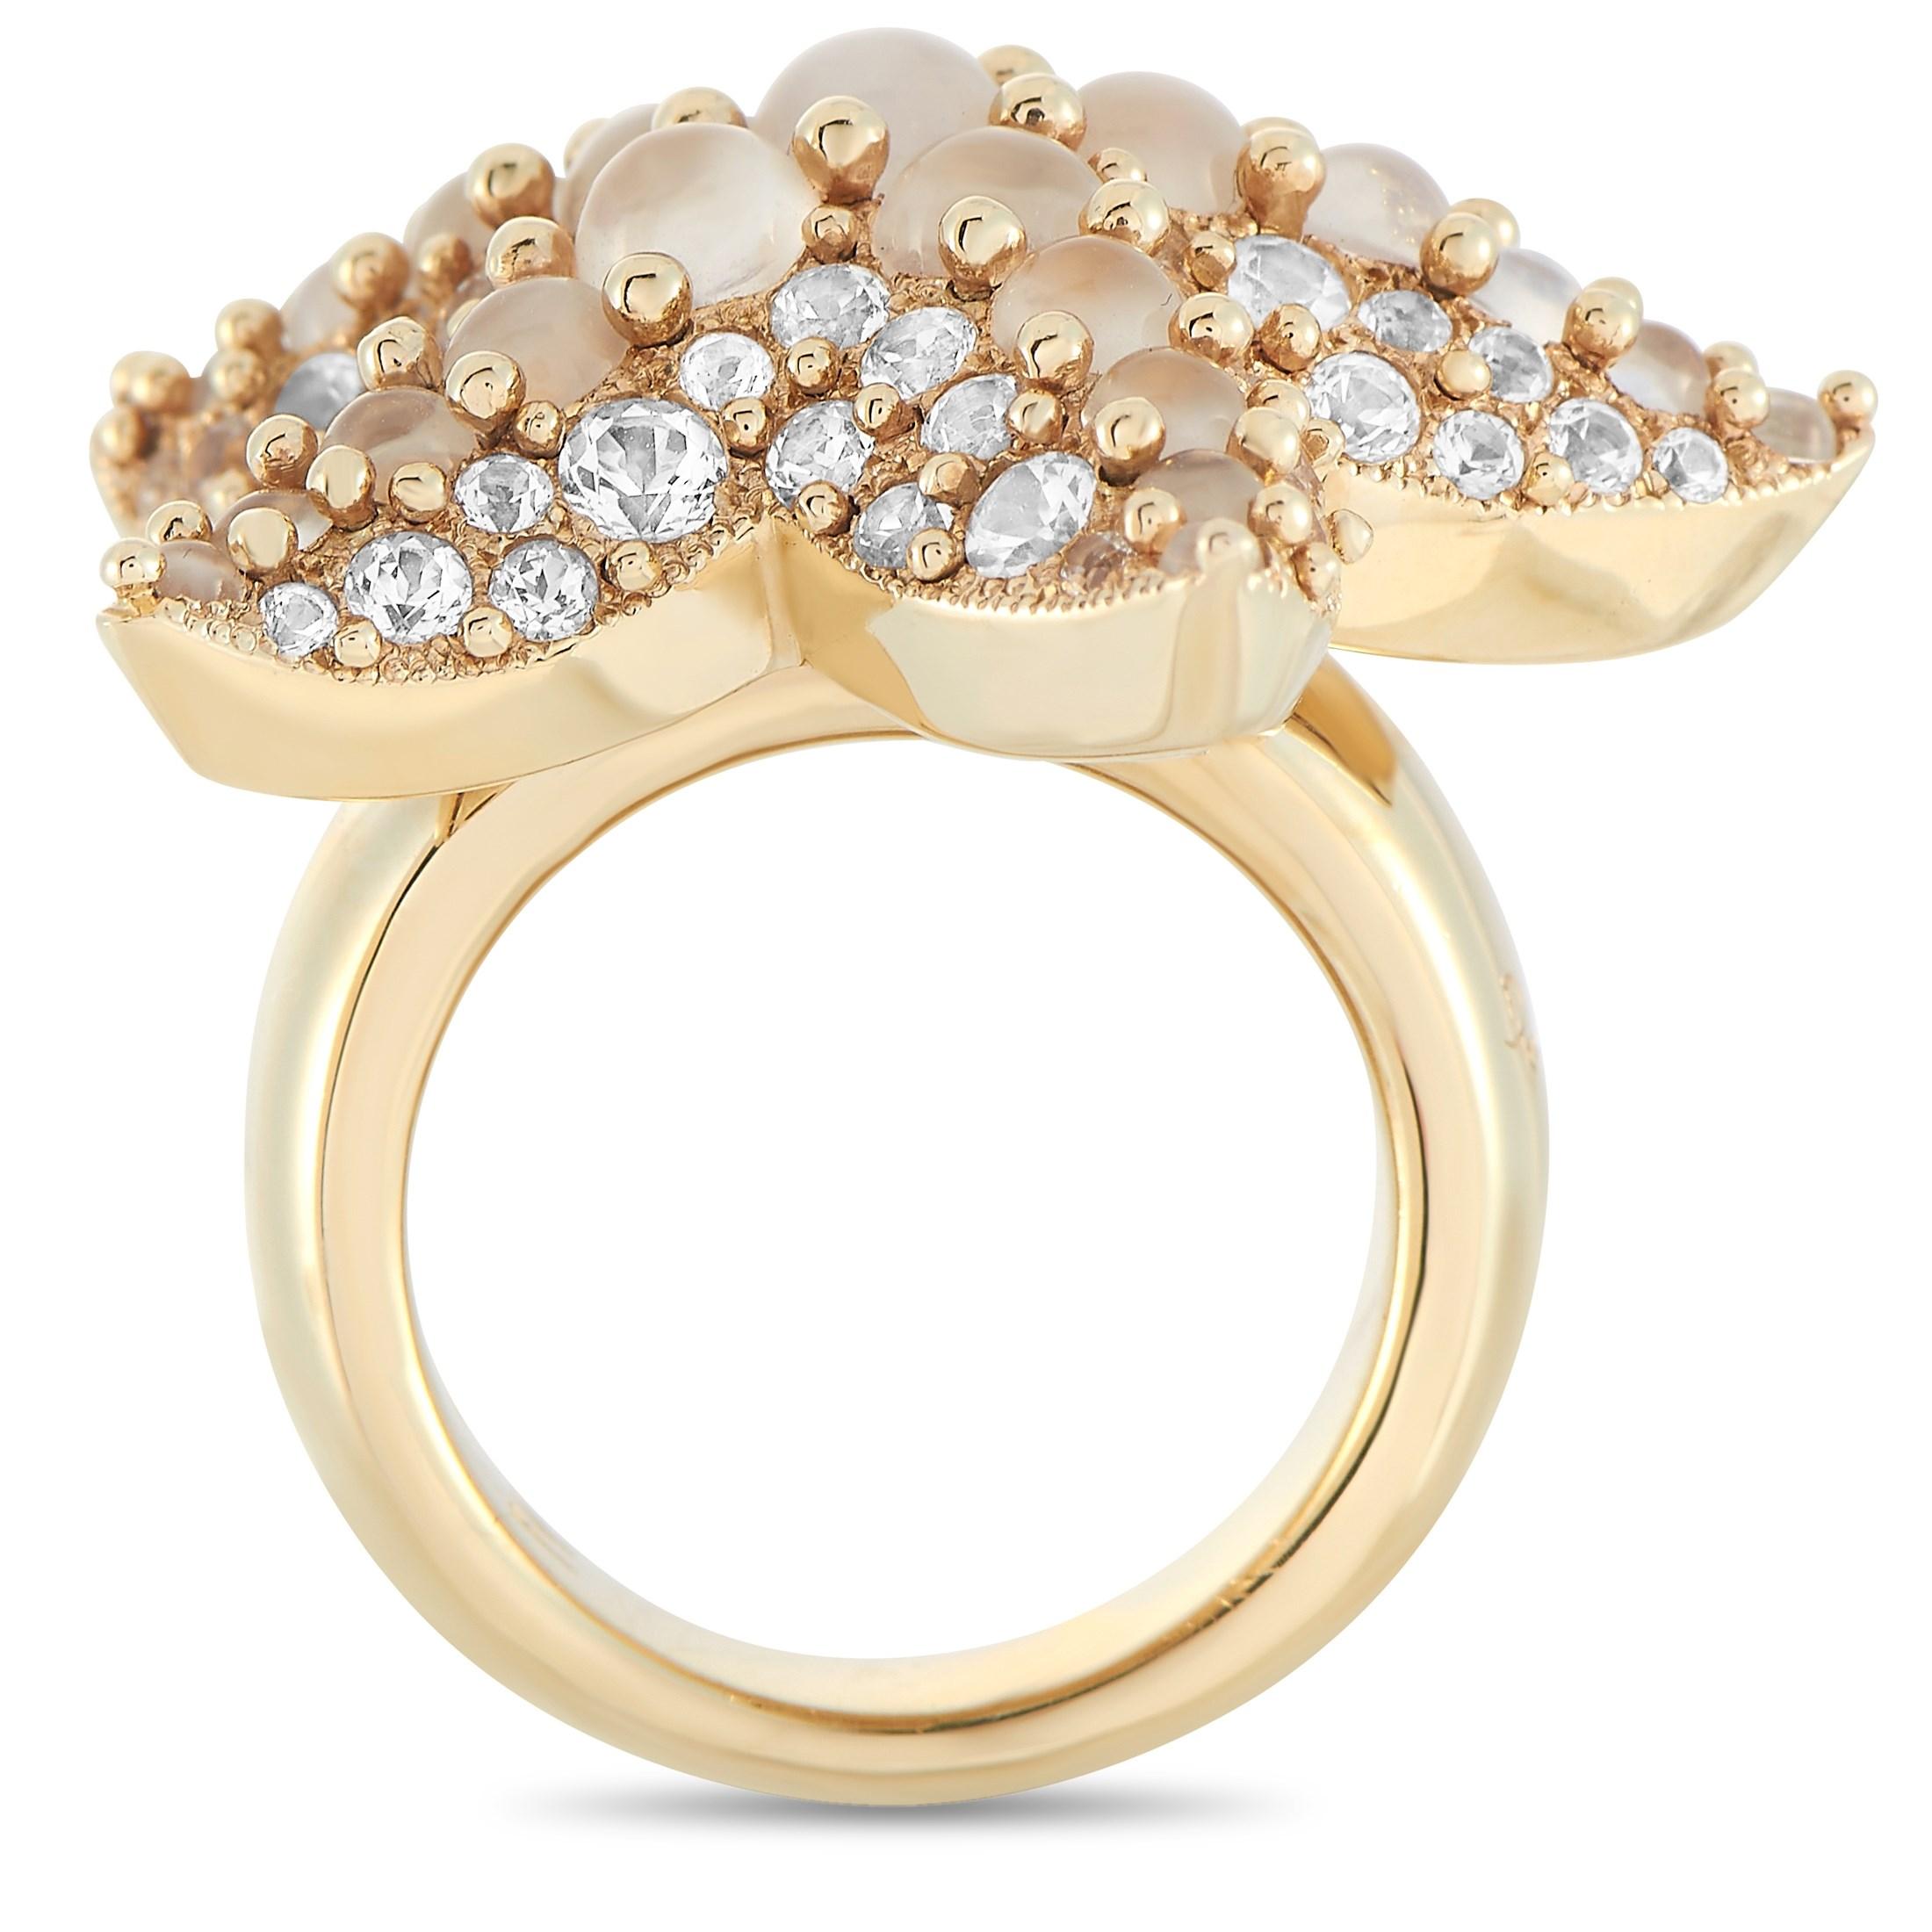 Make a beach babe's wish come true with this Pomellato Sirene 18K Yellow Gold Moonstone and Topaz Starfish Ring. This captivating ring features a 6mm yellow gold band topped with a starfish centerpiece dotted with moonstone and topaz gemstones. A